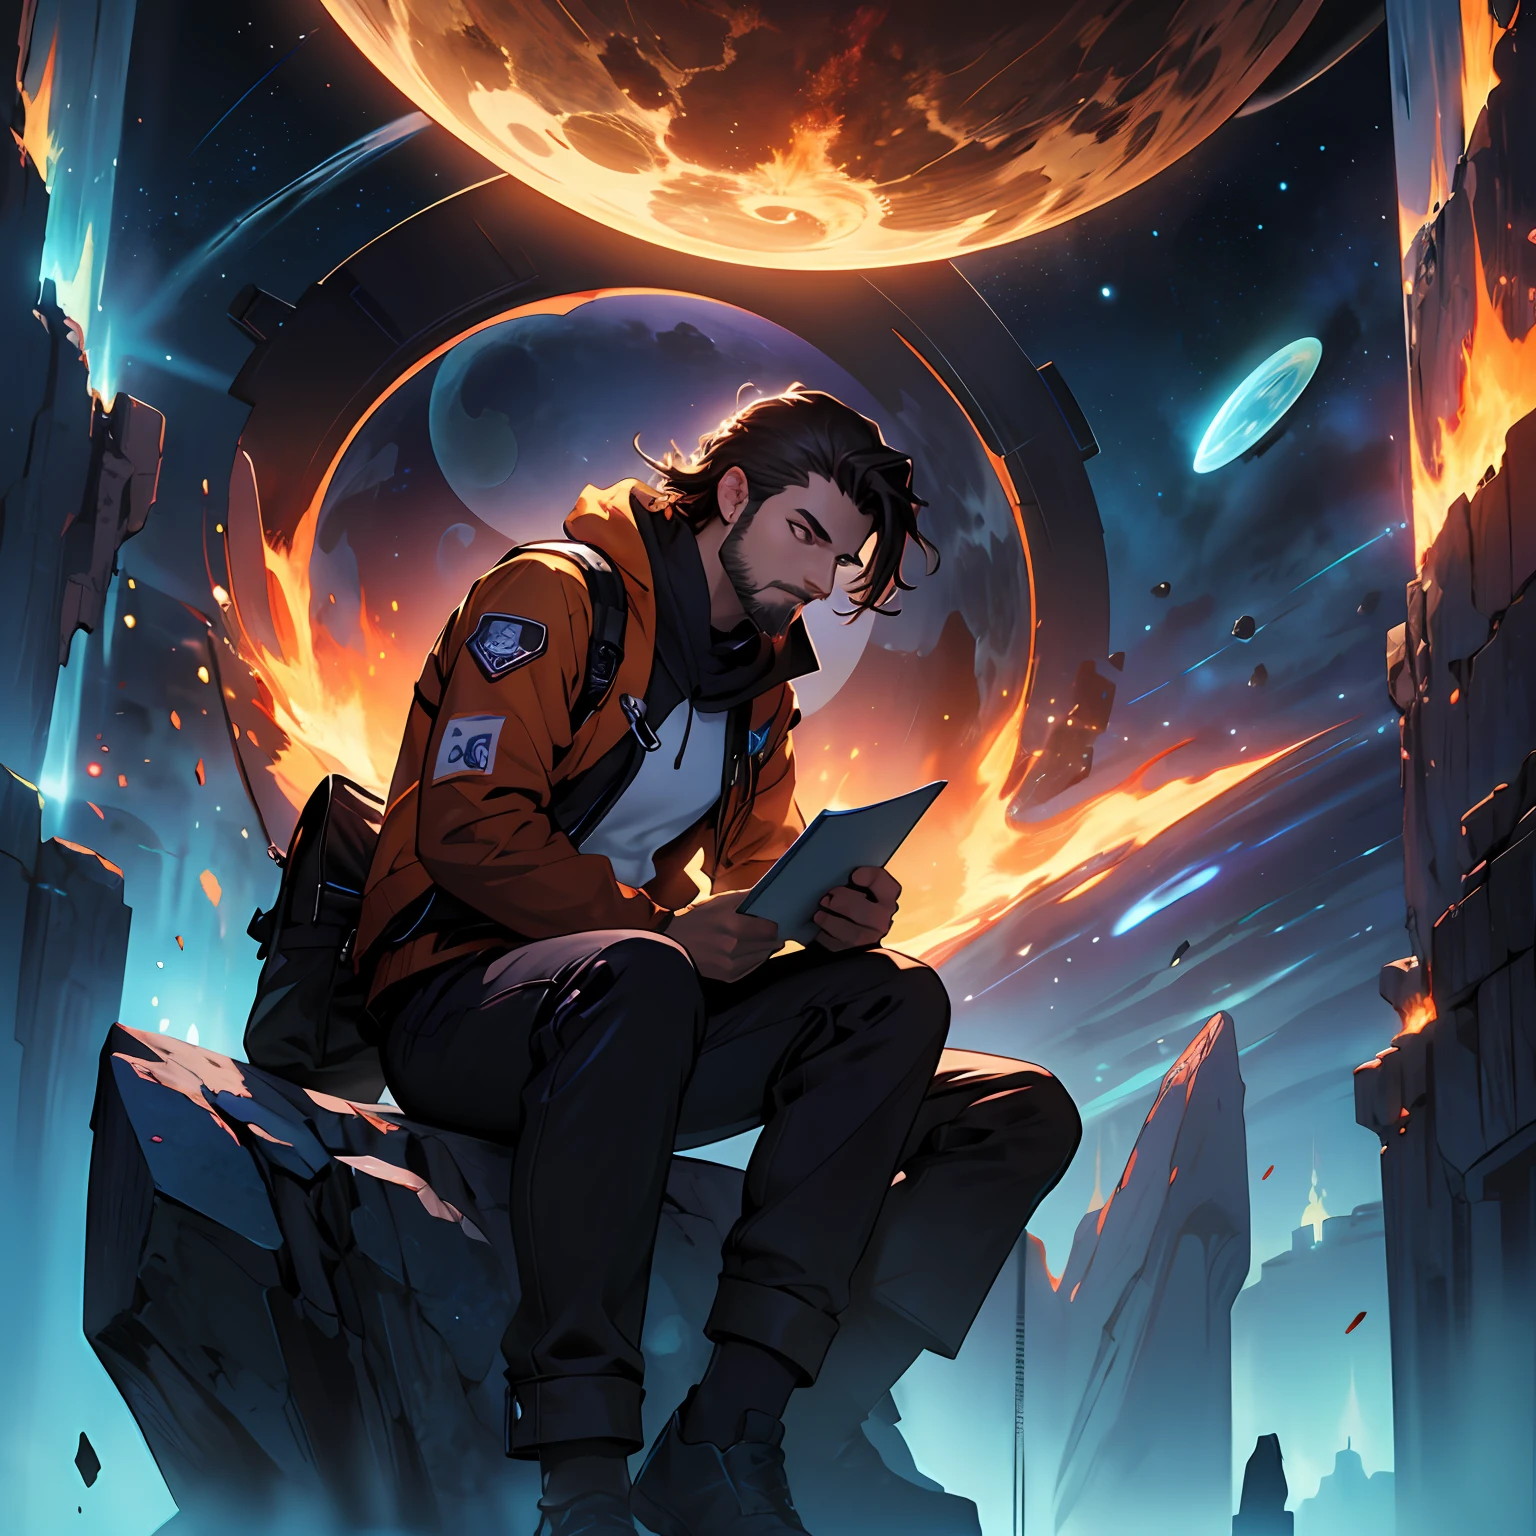 Draw a young programmer, sitting on a research platform floating in the middle of an asteroid belt. He is studying with a notebook, surrounded by several asteroids glowing with fiery auras. Dramatic lighting from distant stars and planets illuminates the scene, casting deep shadows on the suit. The young man looks confident and determined, looking at the vast and mysterious universe with wonder and respect,facial hair, cowboy shot, --auto